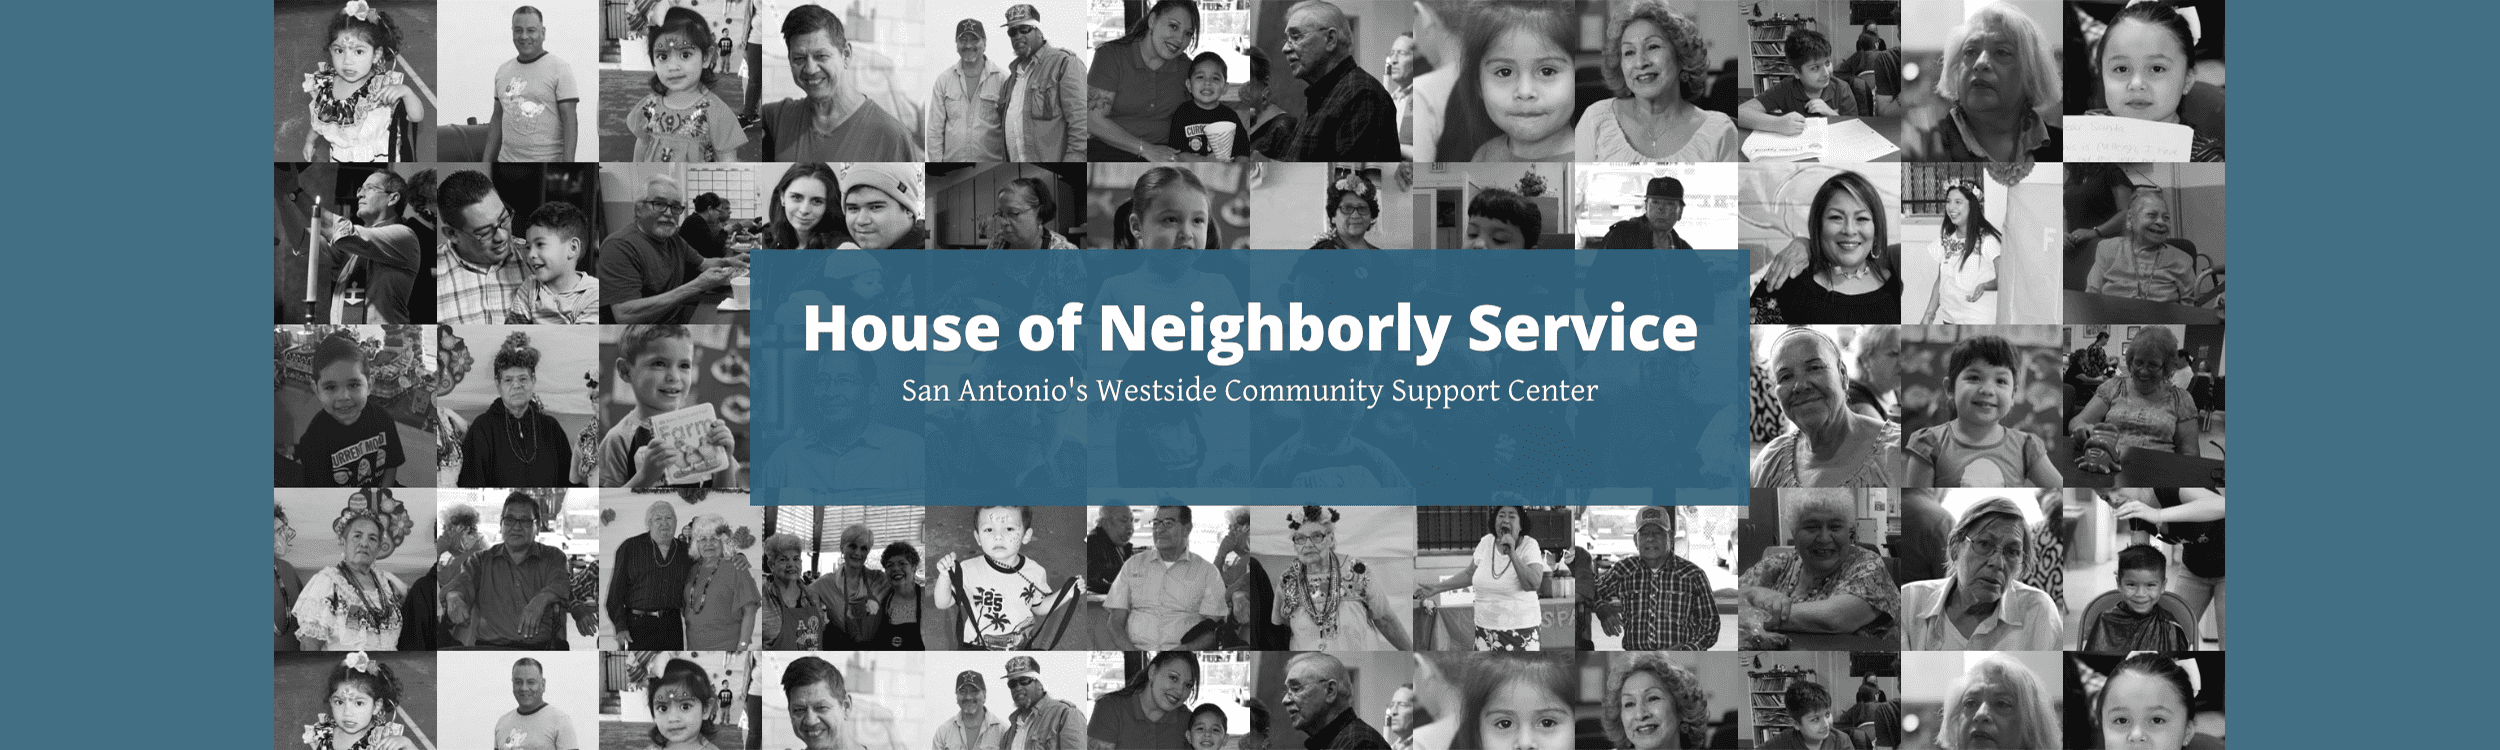 New Client Announcement: House of Neighborly Service